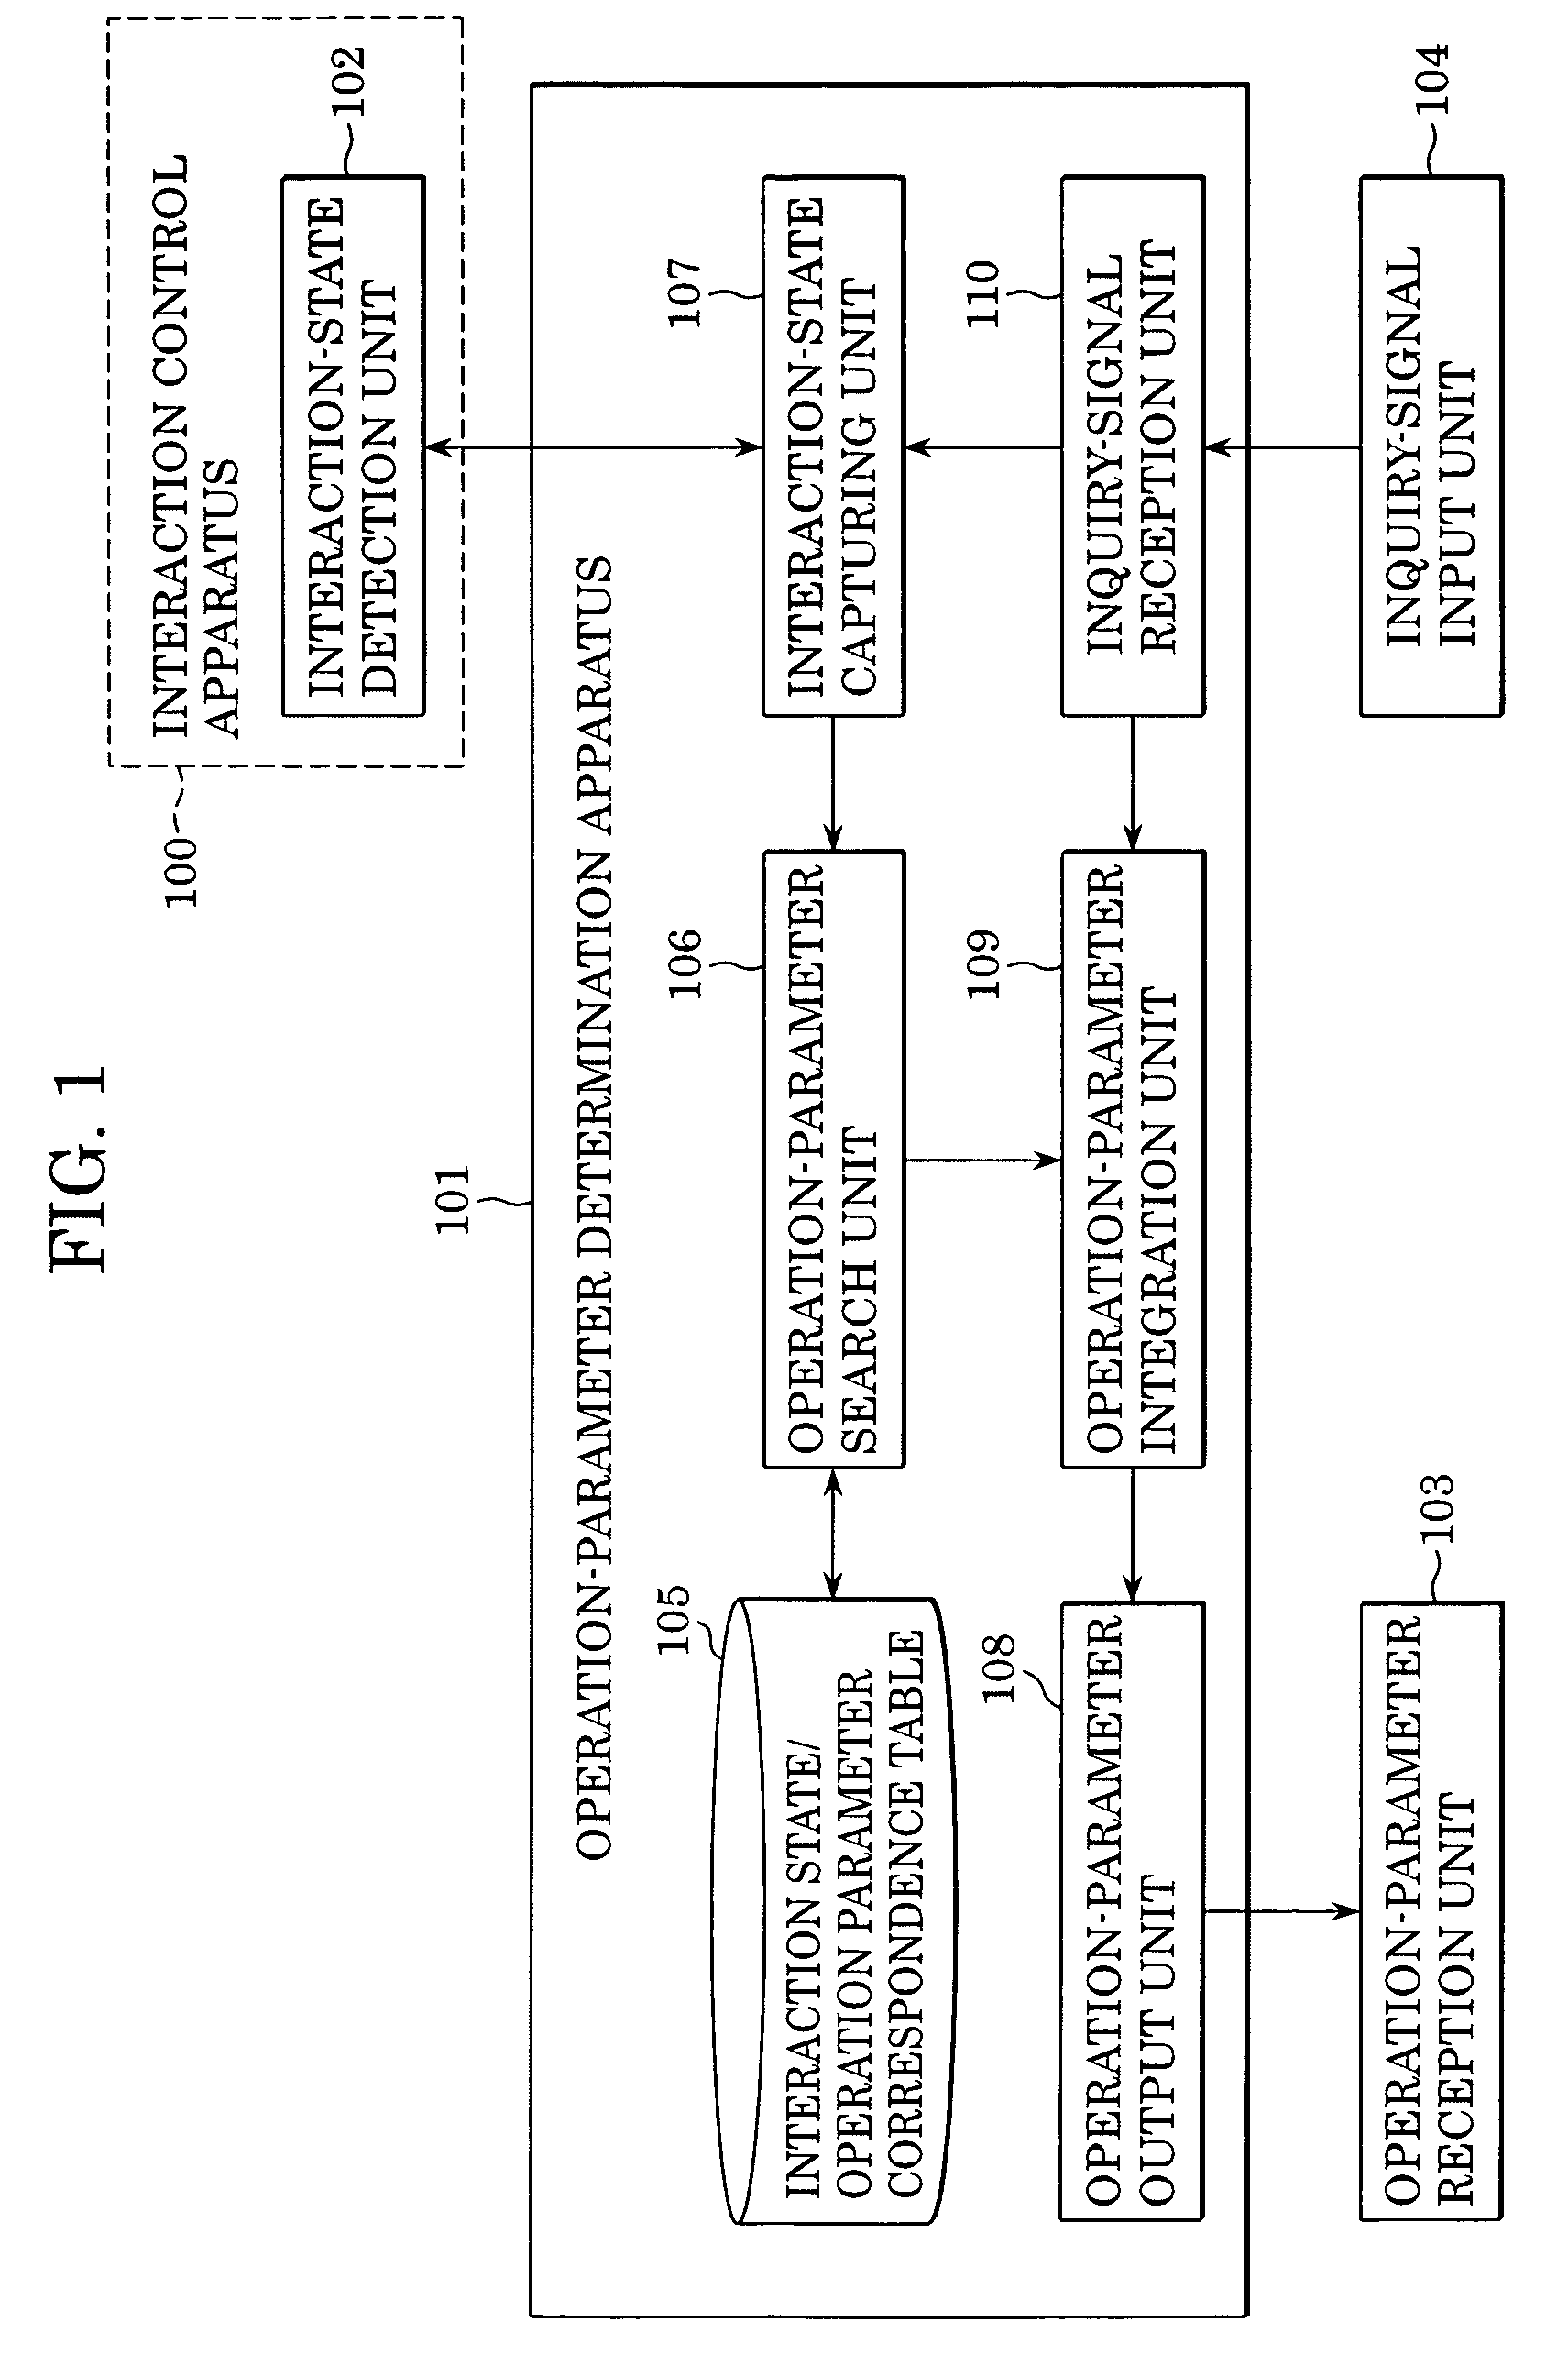 User interaction and operation-parameter determination system and operation-parameter determination method